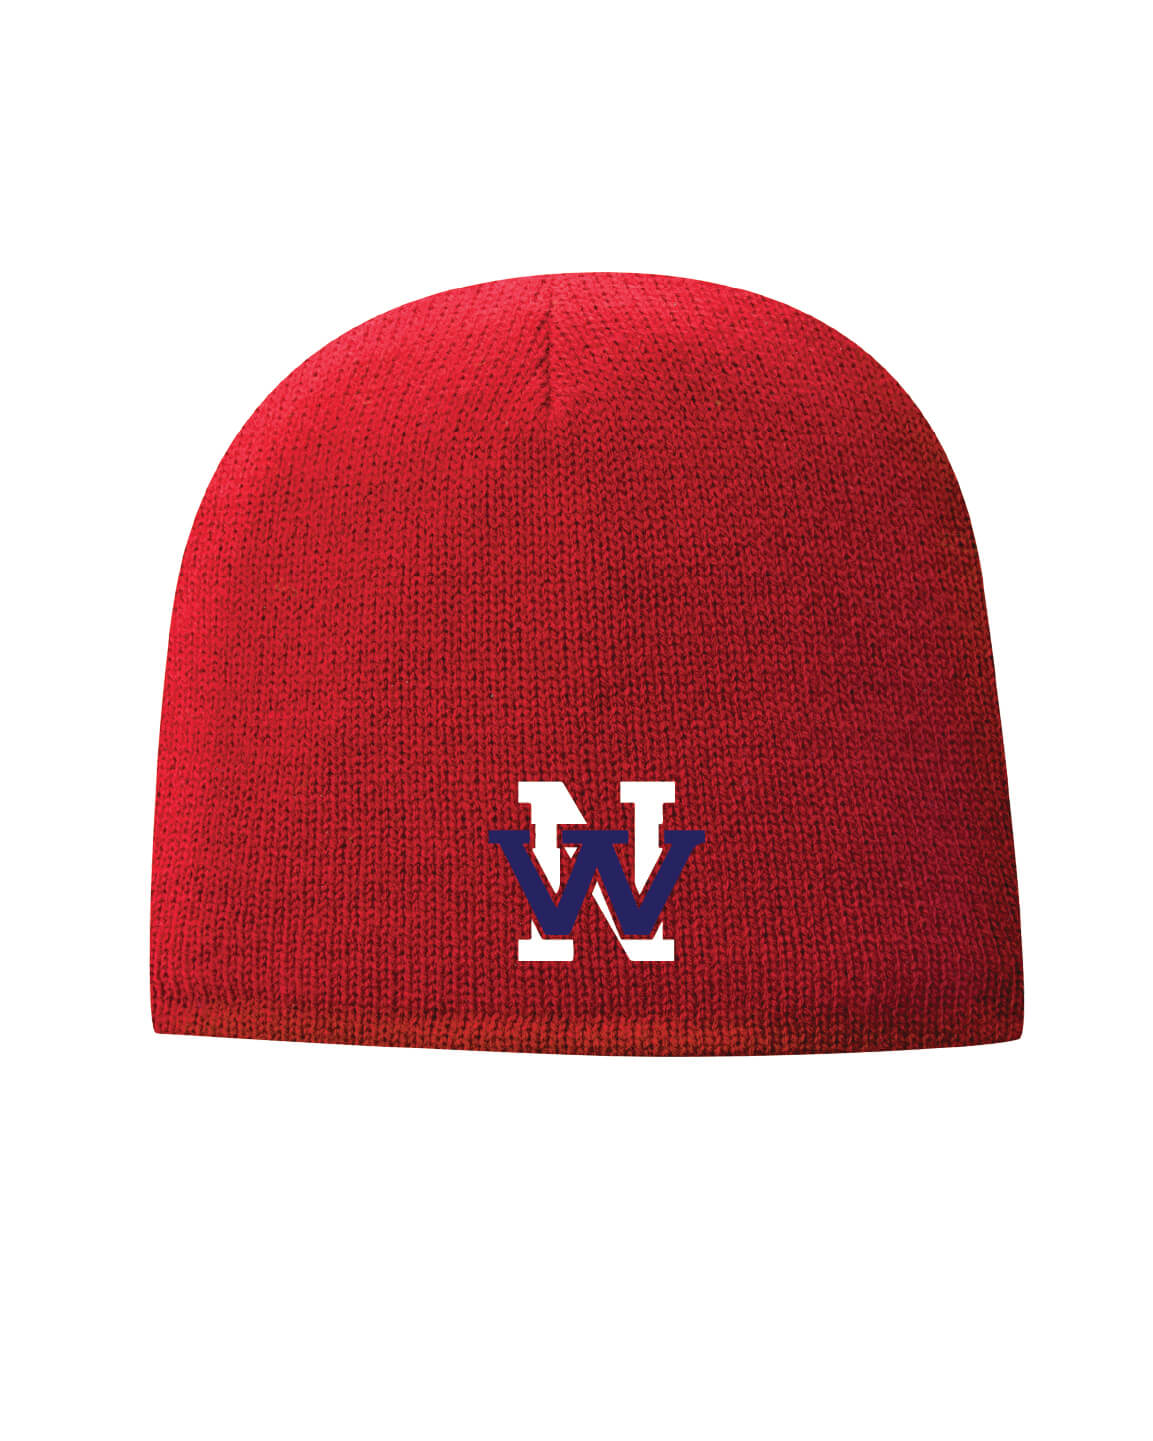 NW Fleece Lined Beanie red